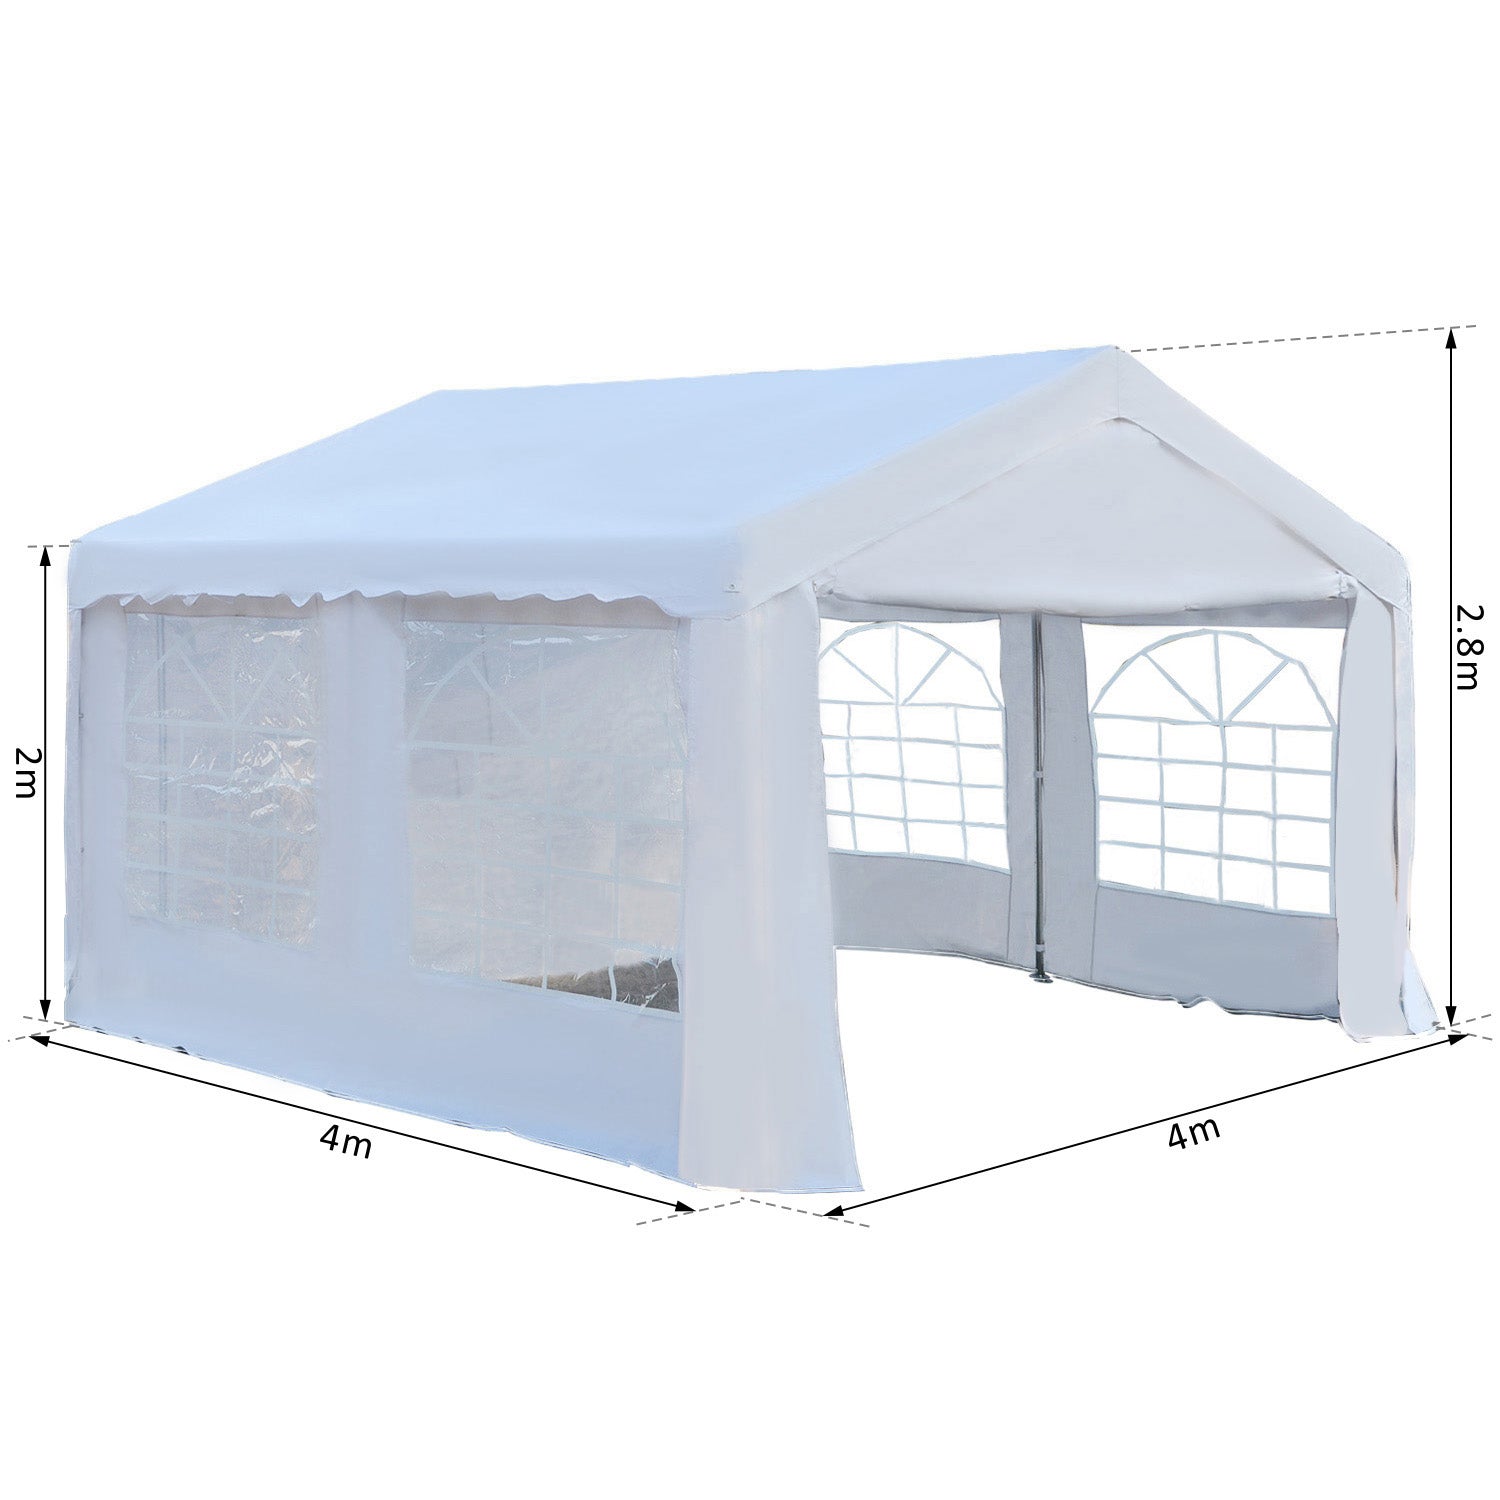 4m x 4 m Party Tents Portable Carport Shelter with Removable Sidewalls & Double Doors, Heavy Duty Party Tent Car Canopy-2